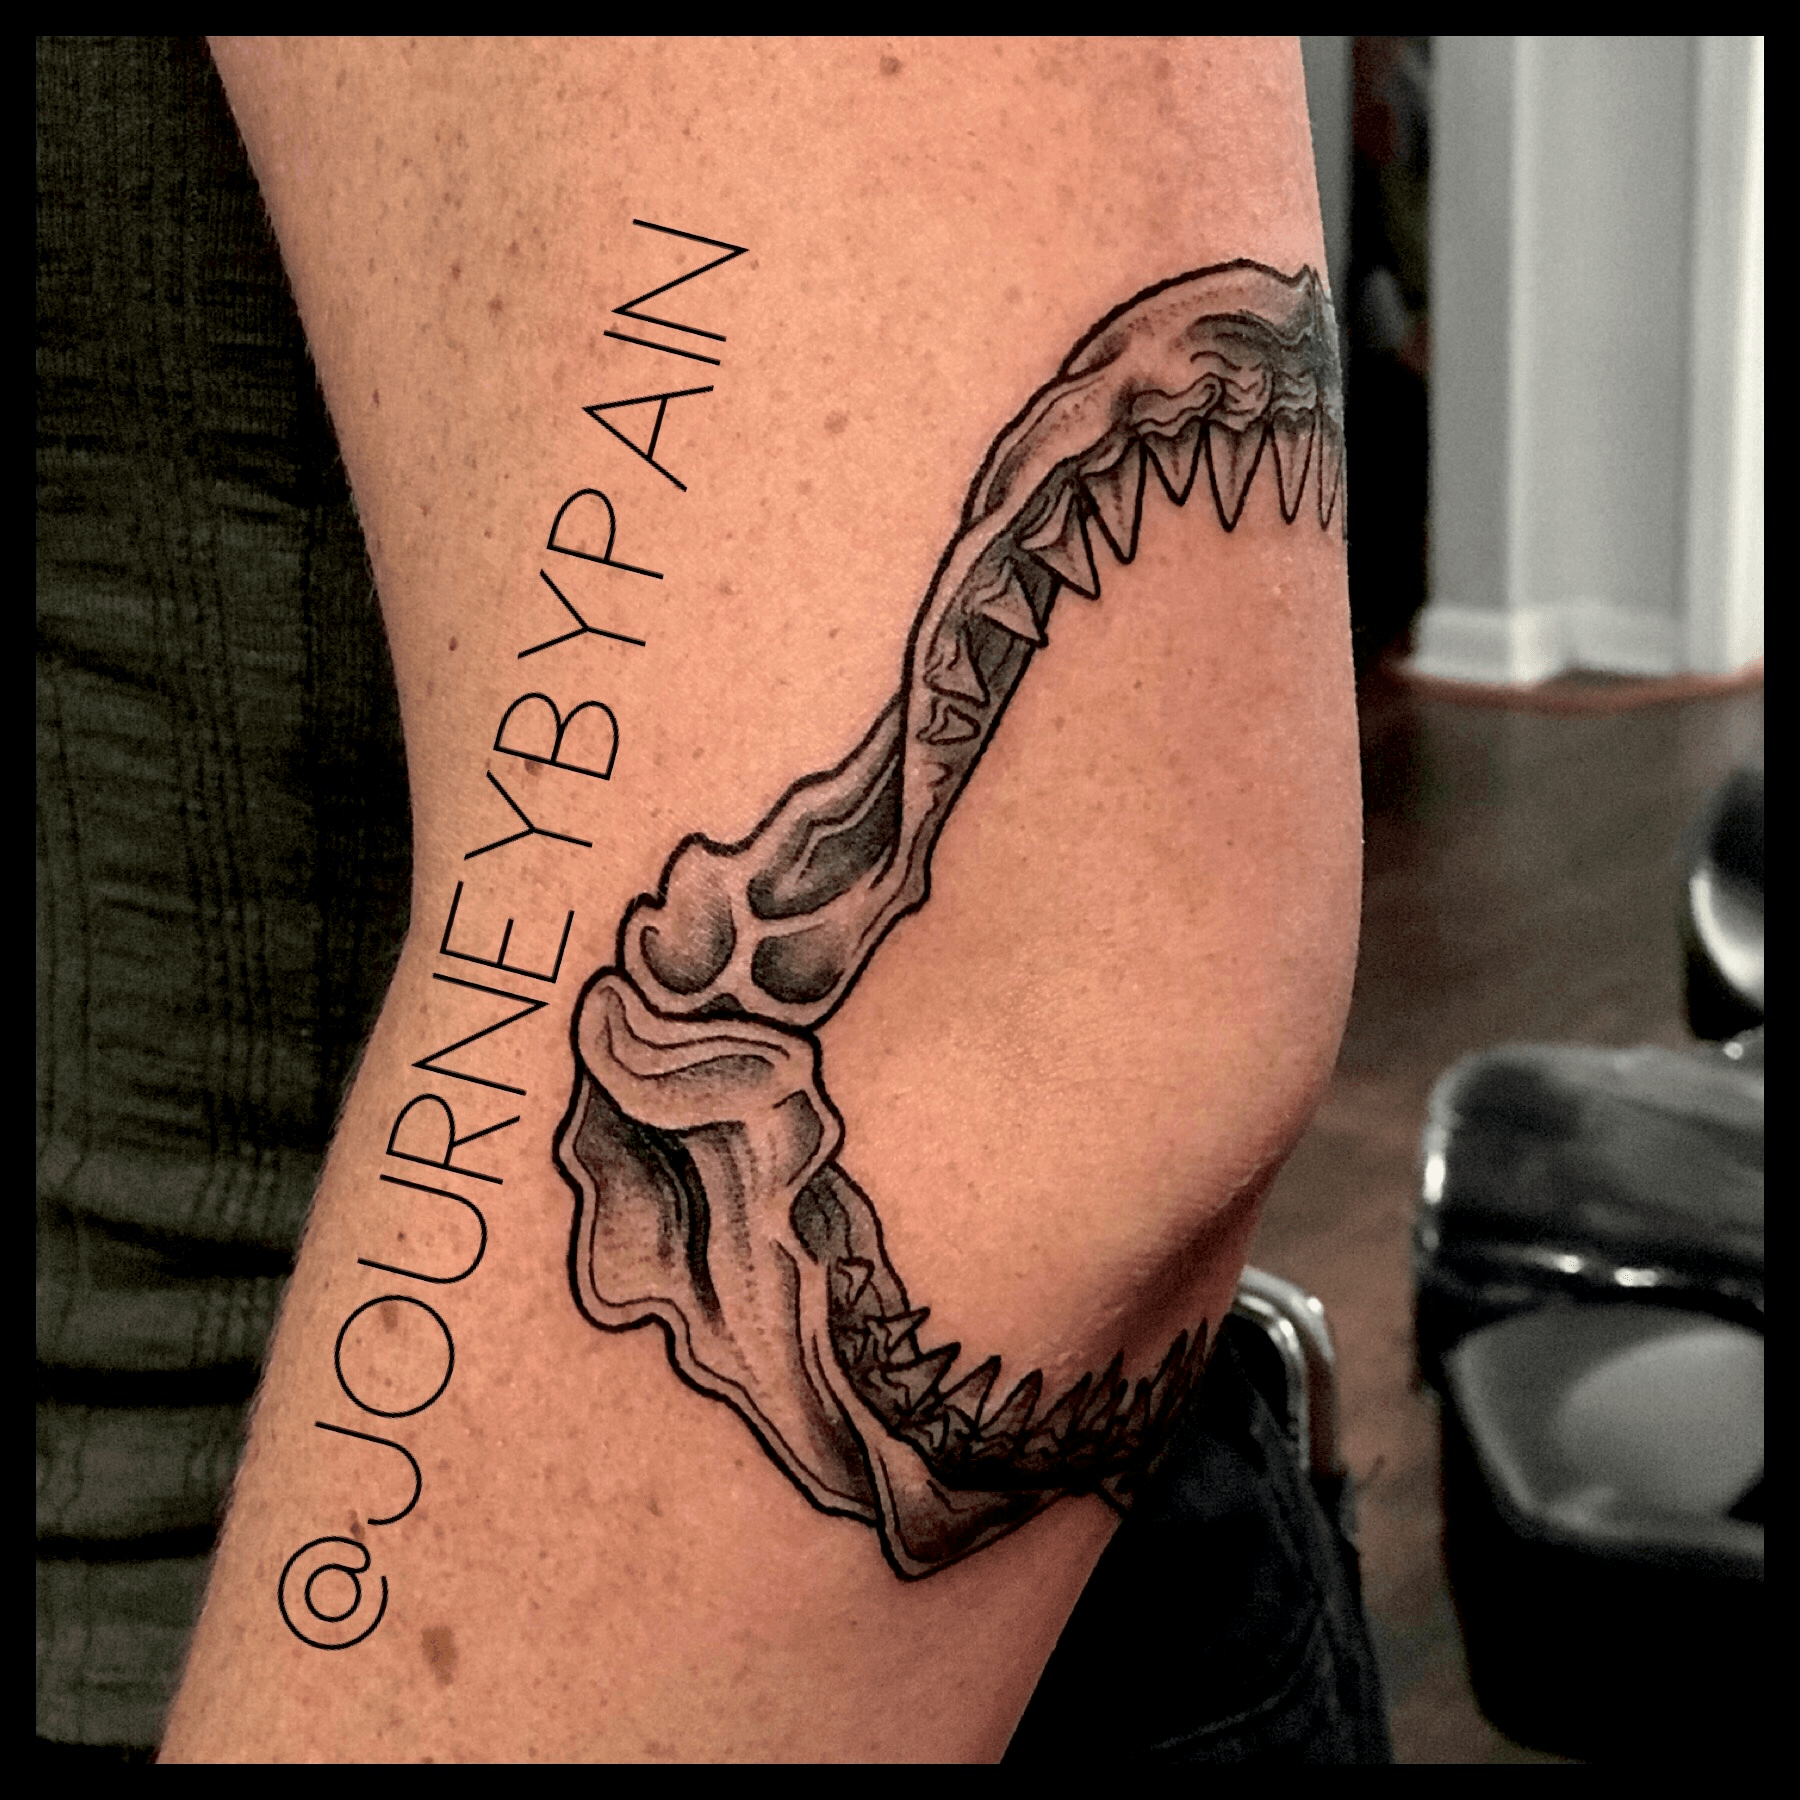 60 Shark Jaw Tattoo Designs For Men  A Bite Of Ink Ideas  Shark jaws  tattoo Tattoo designs men Tattoo designs